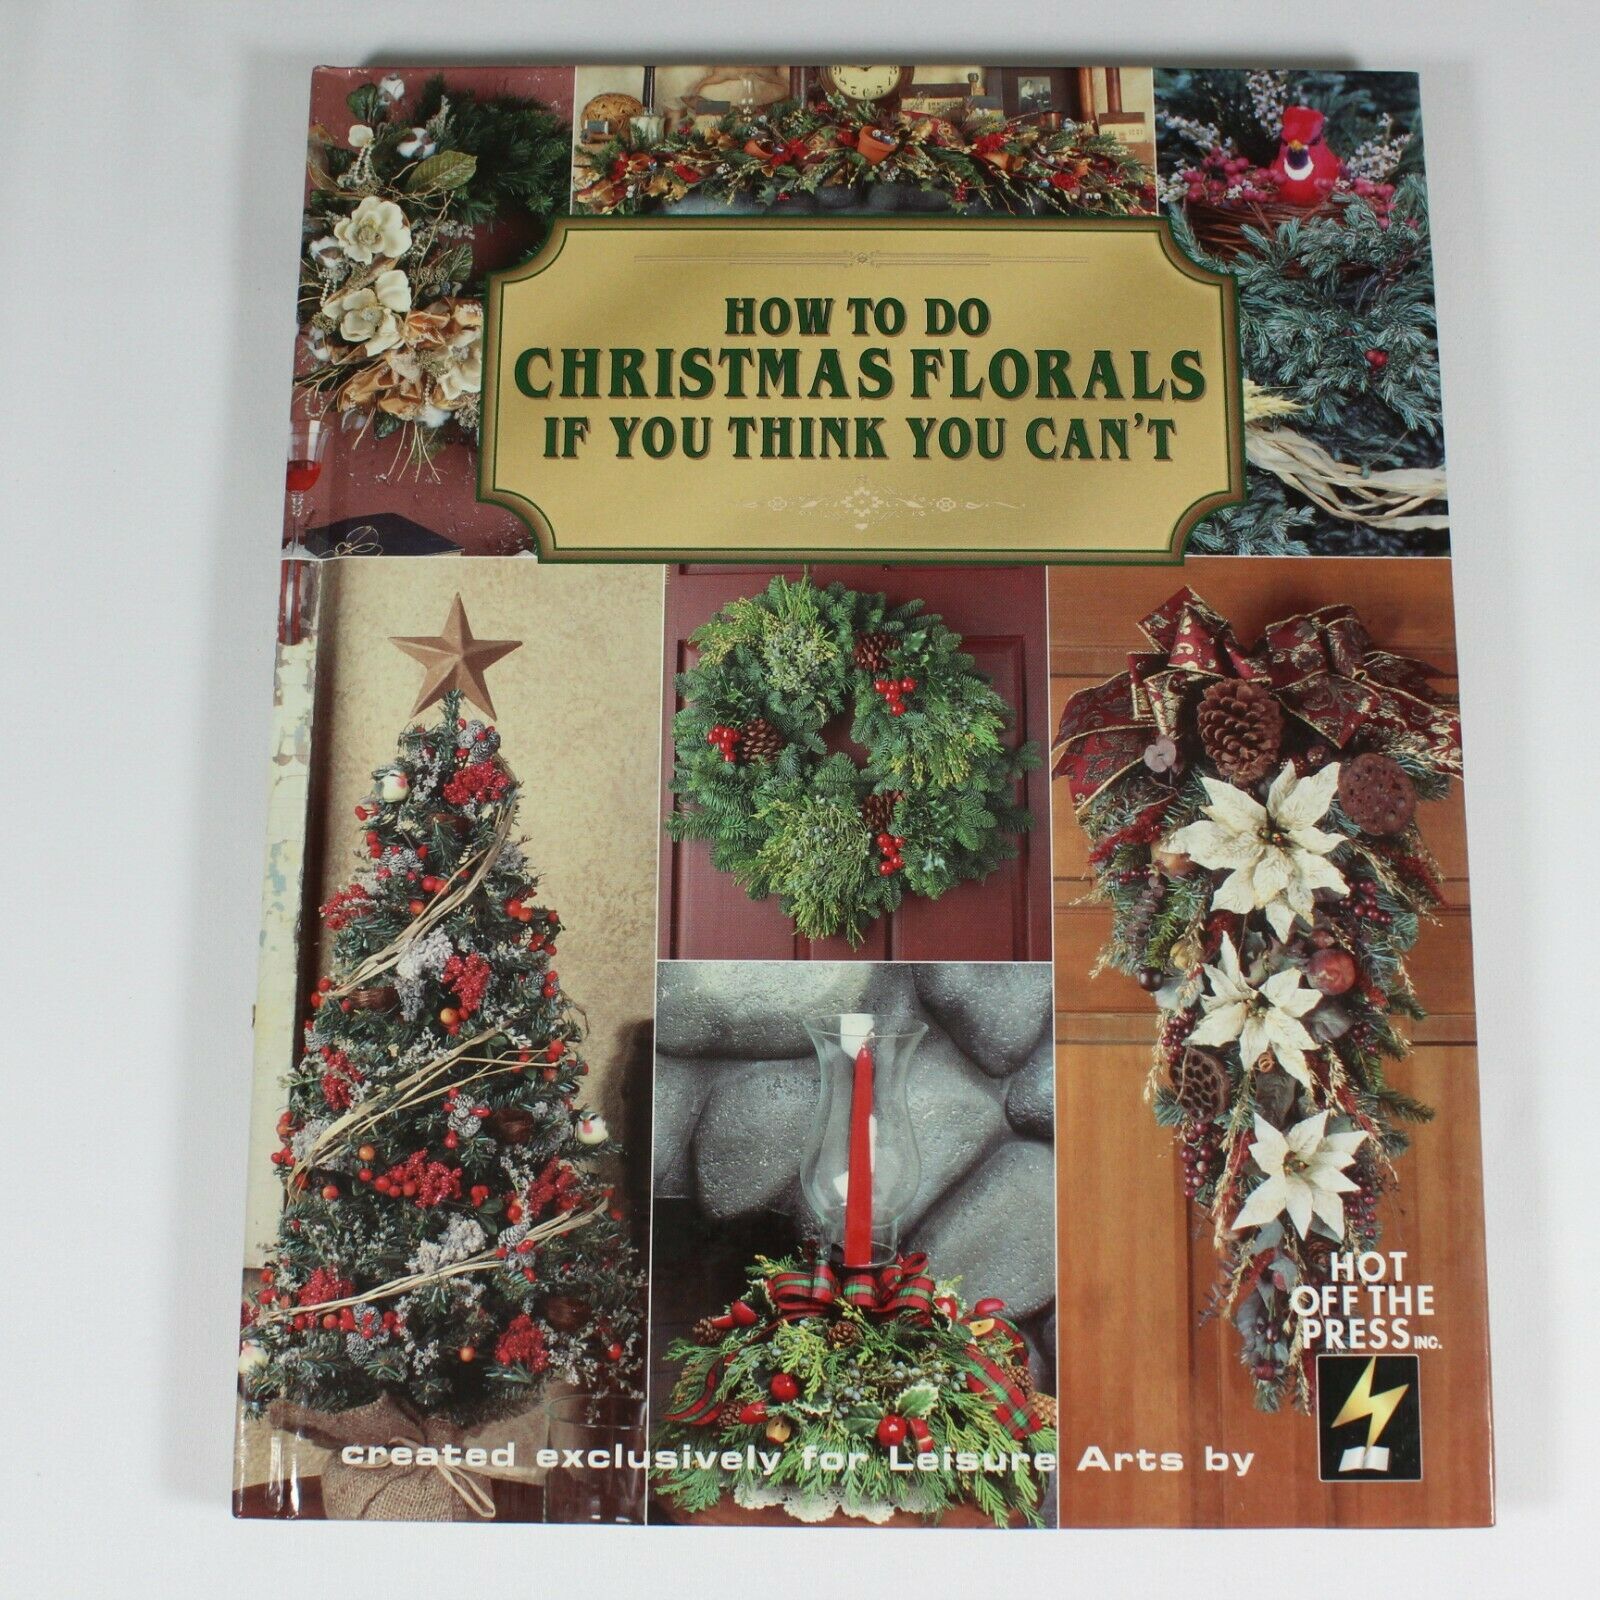 How To Do Christmas Florals If You Think You Can't Leisure Arts Hardback Book